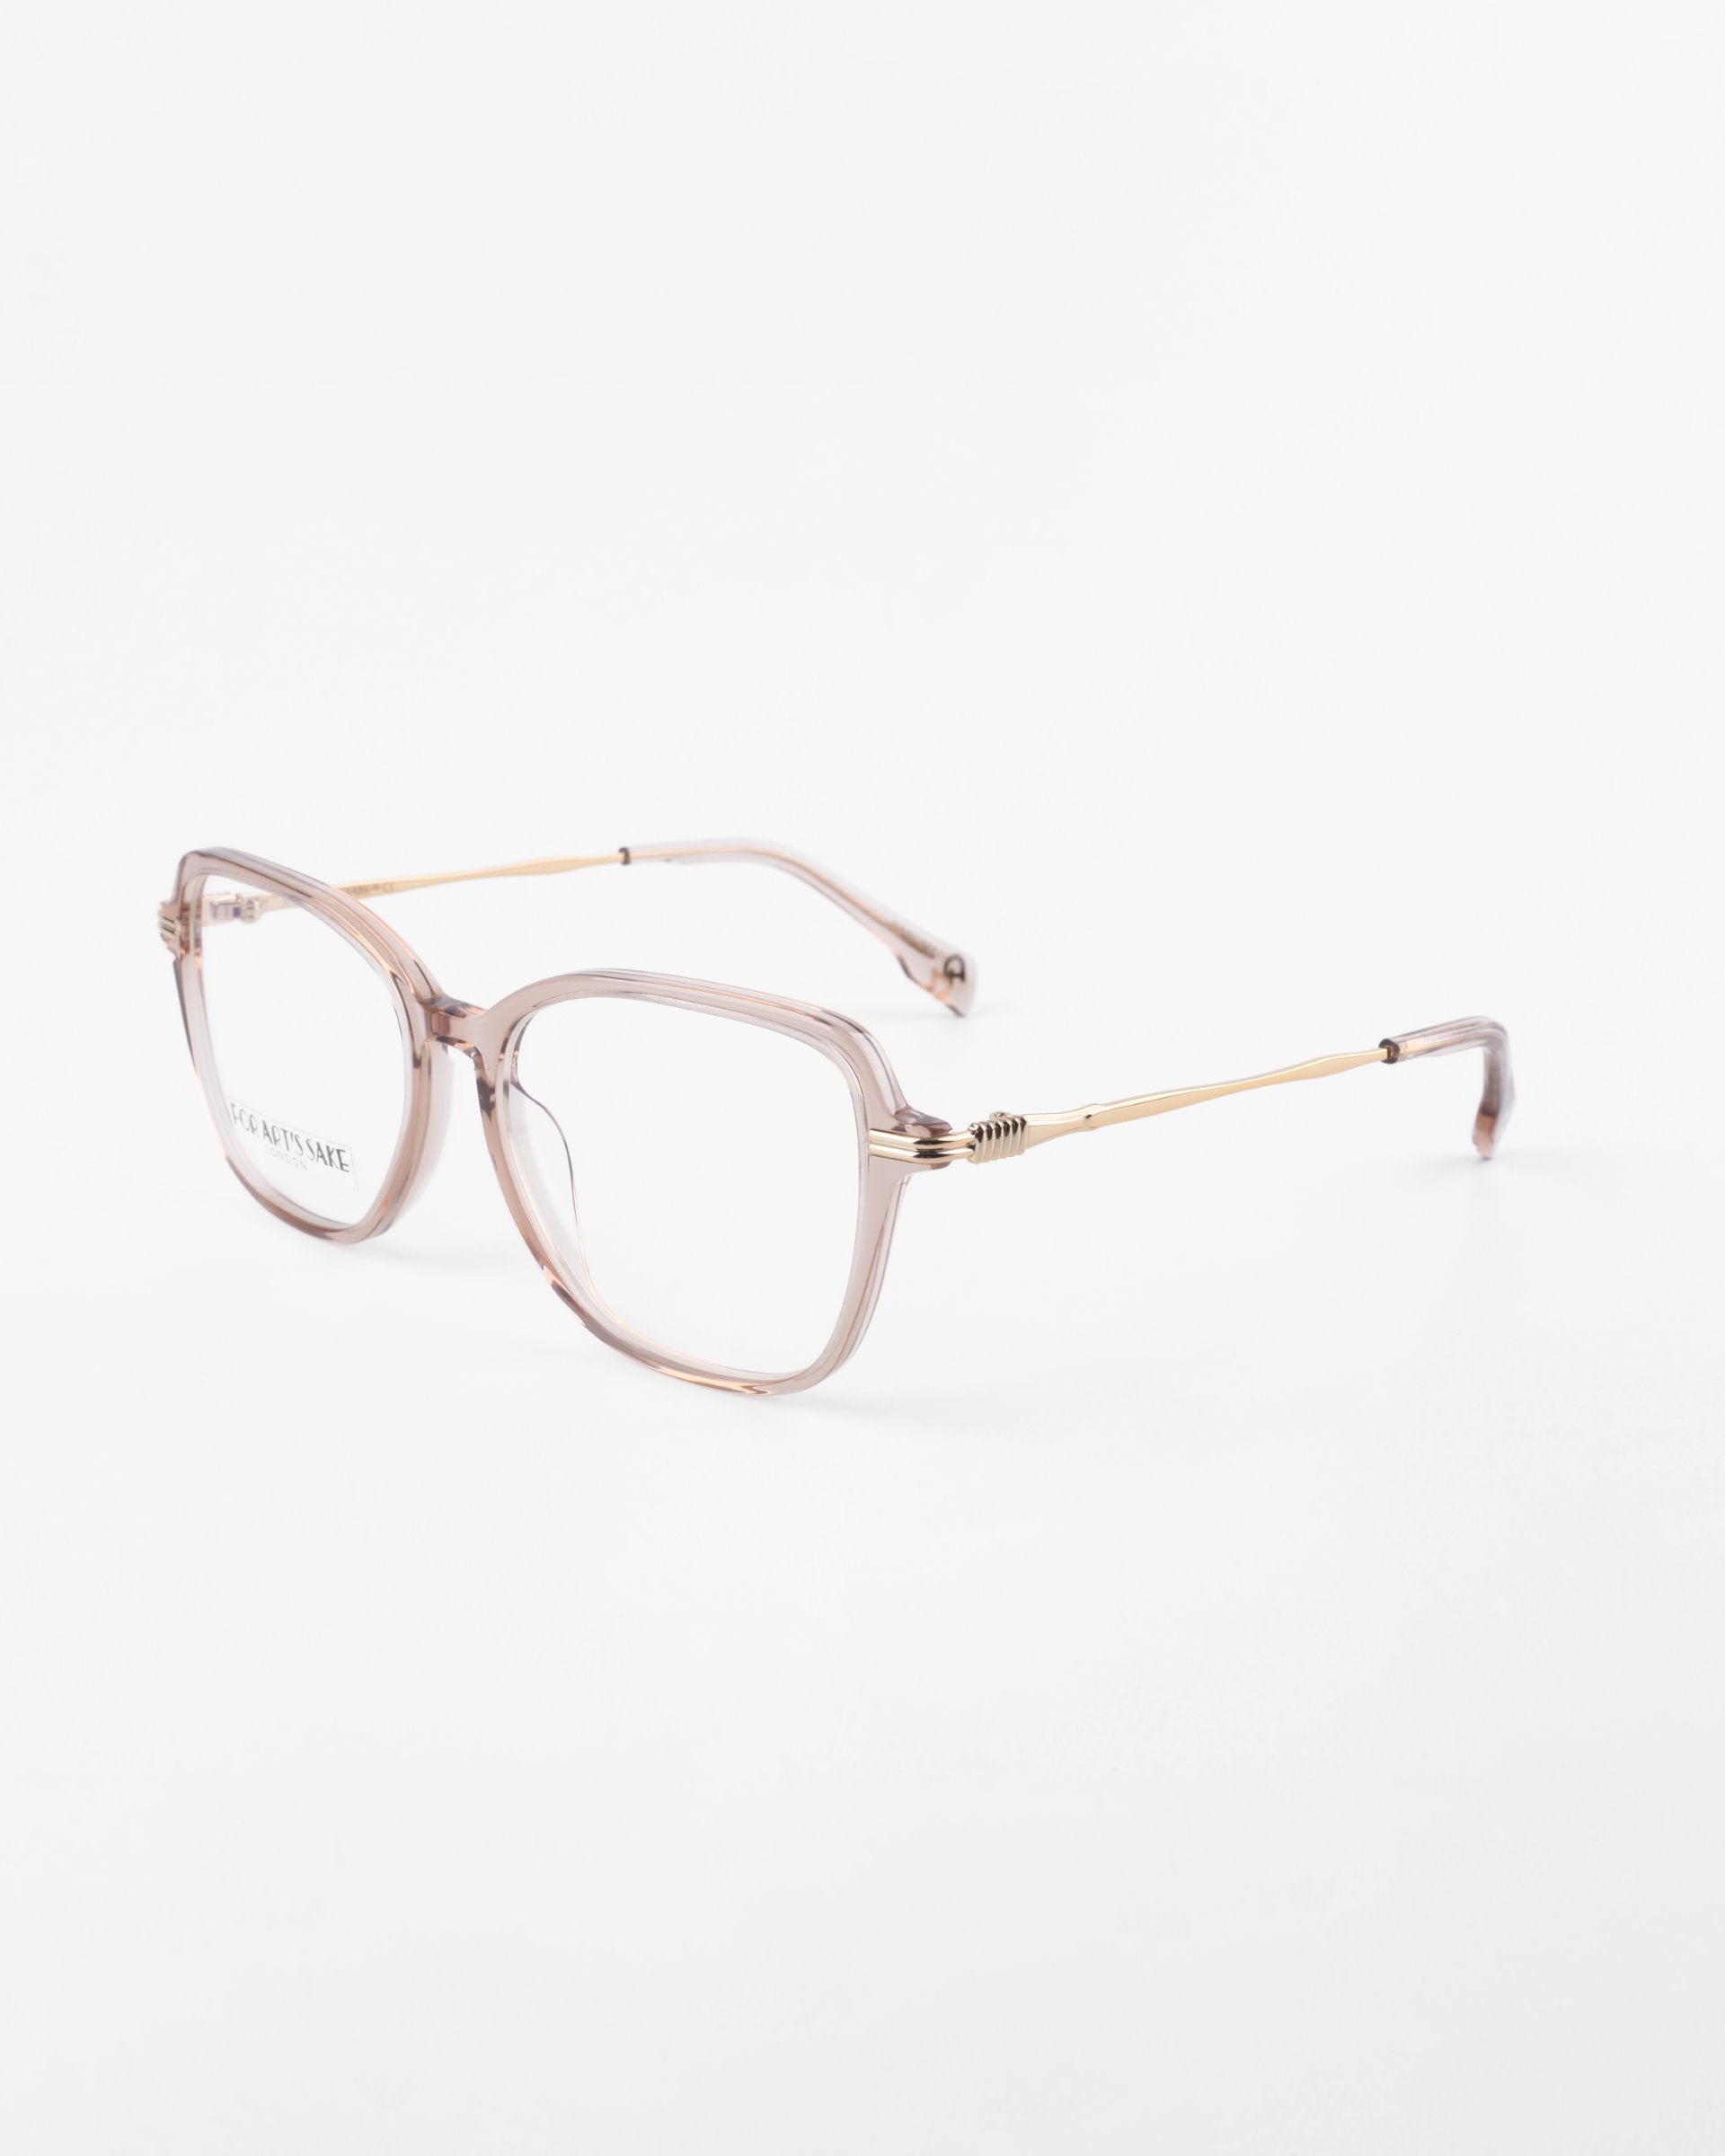 A pair of transparent, square-shaped eyeglasses with thin, 18-karat gold-plated temples and spring hinges on a plain white background. The frames have a subtle pink tint, and the ends of the temples are also pink. These stylish Sonnet glasses from For Art's Sake® come with blue light filter prescription lenses for added comfort.